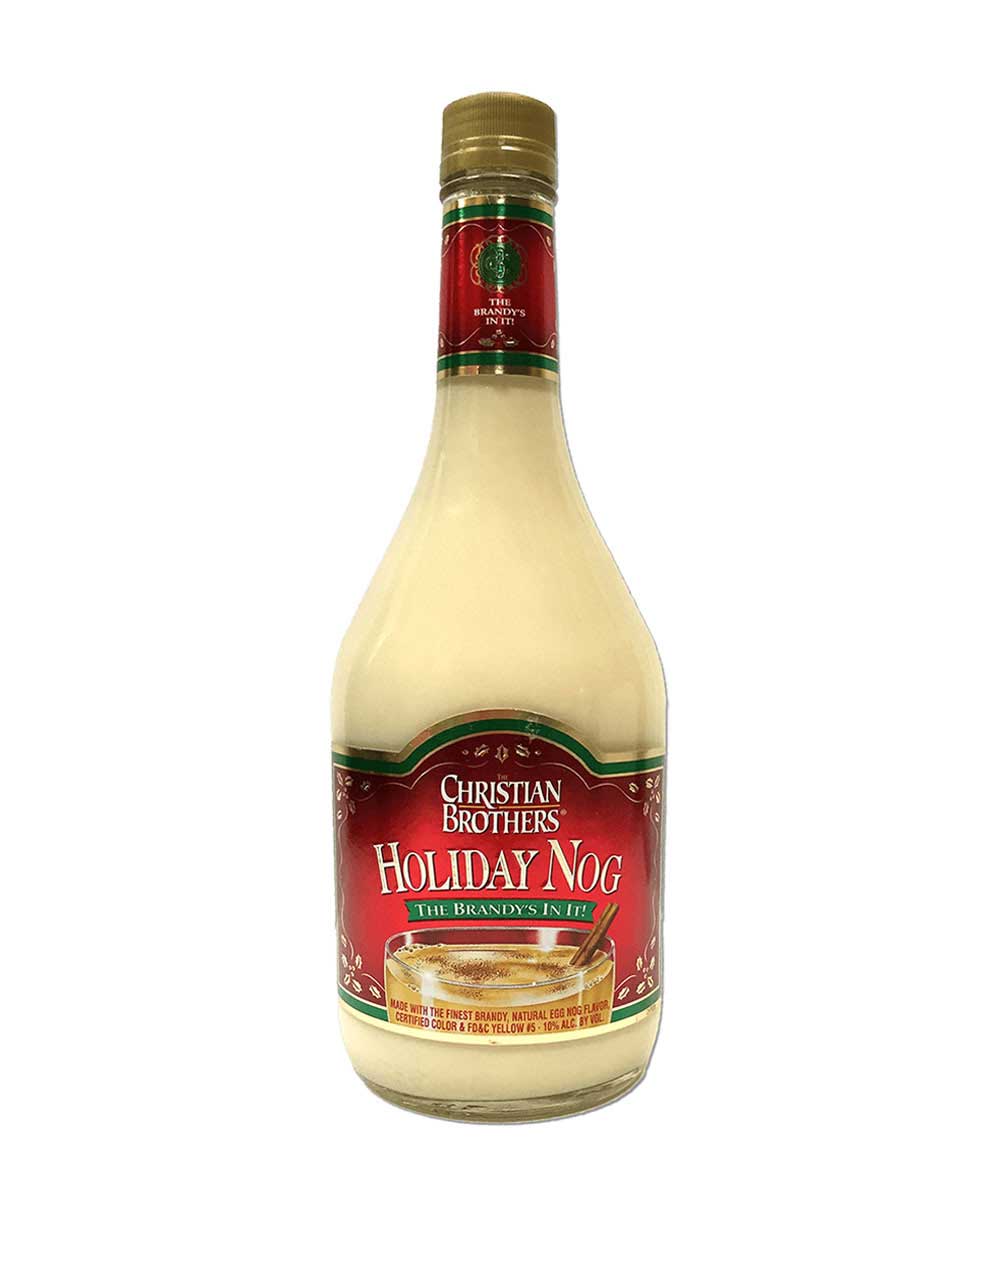 The Christian Brothers Holiday Nog